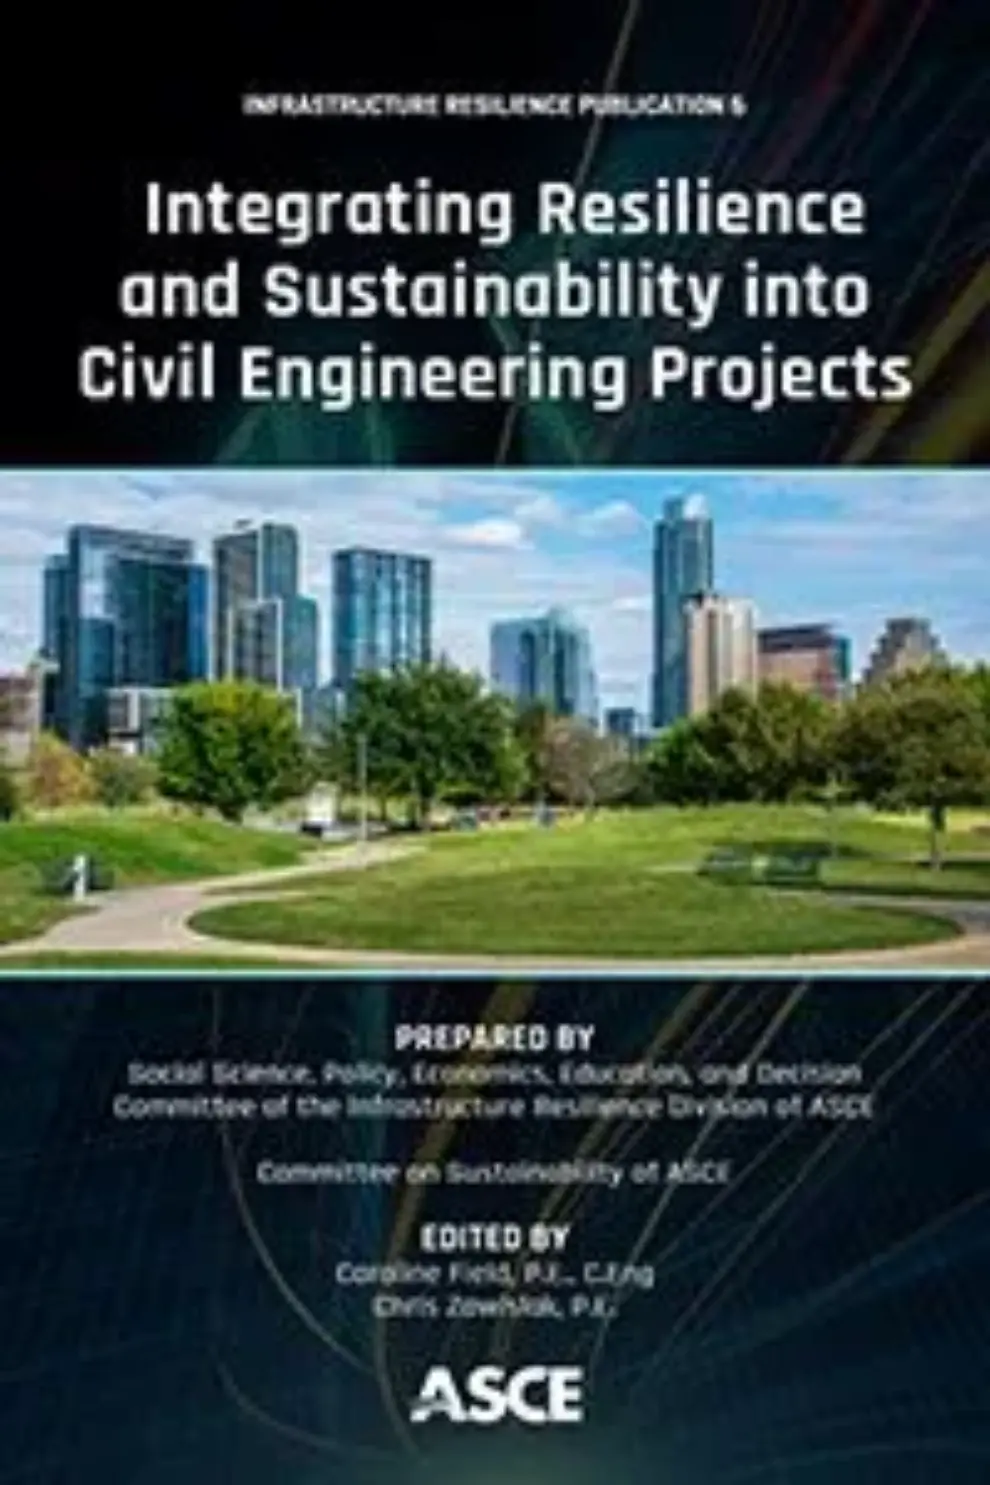 <strong>New ASCE Publication Focus on Infrastructure Resilience and Sustainability</strong>